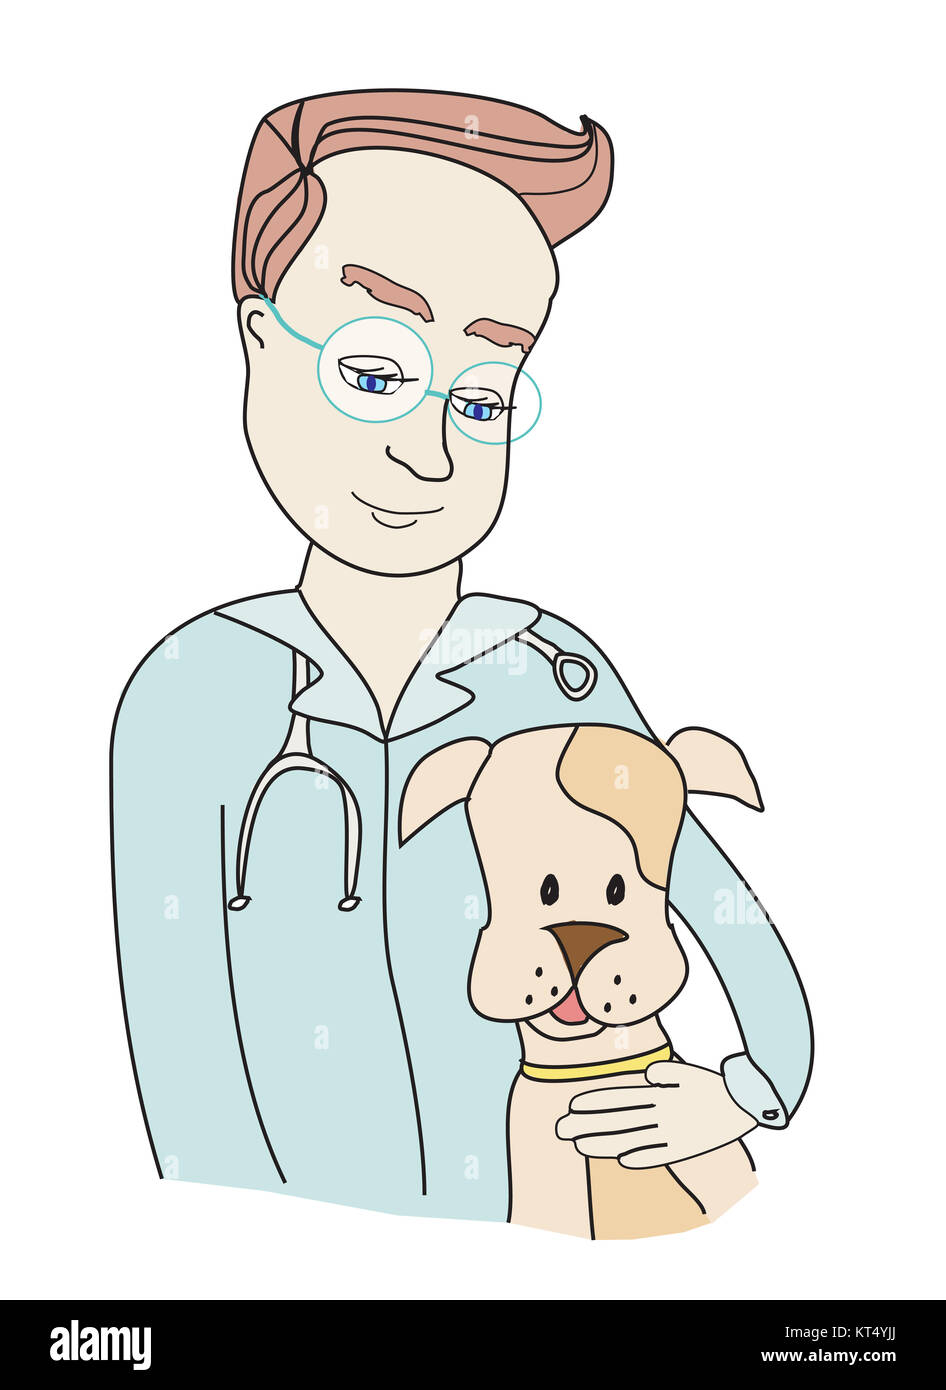 dog and veterinarian - doodle illustration. Stock Photo